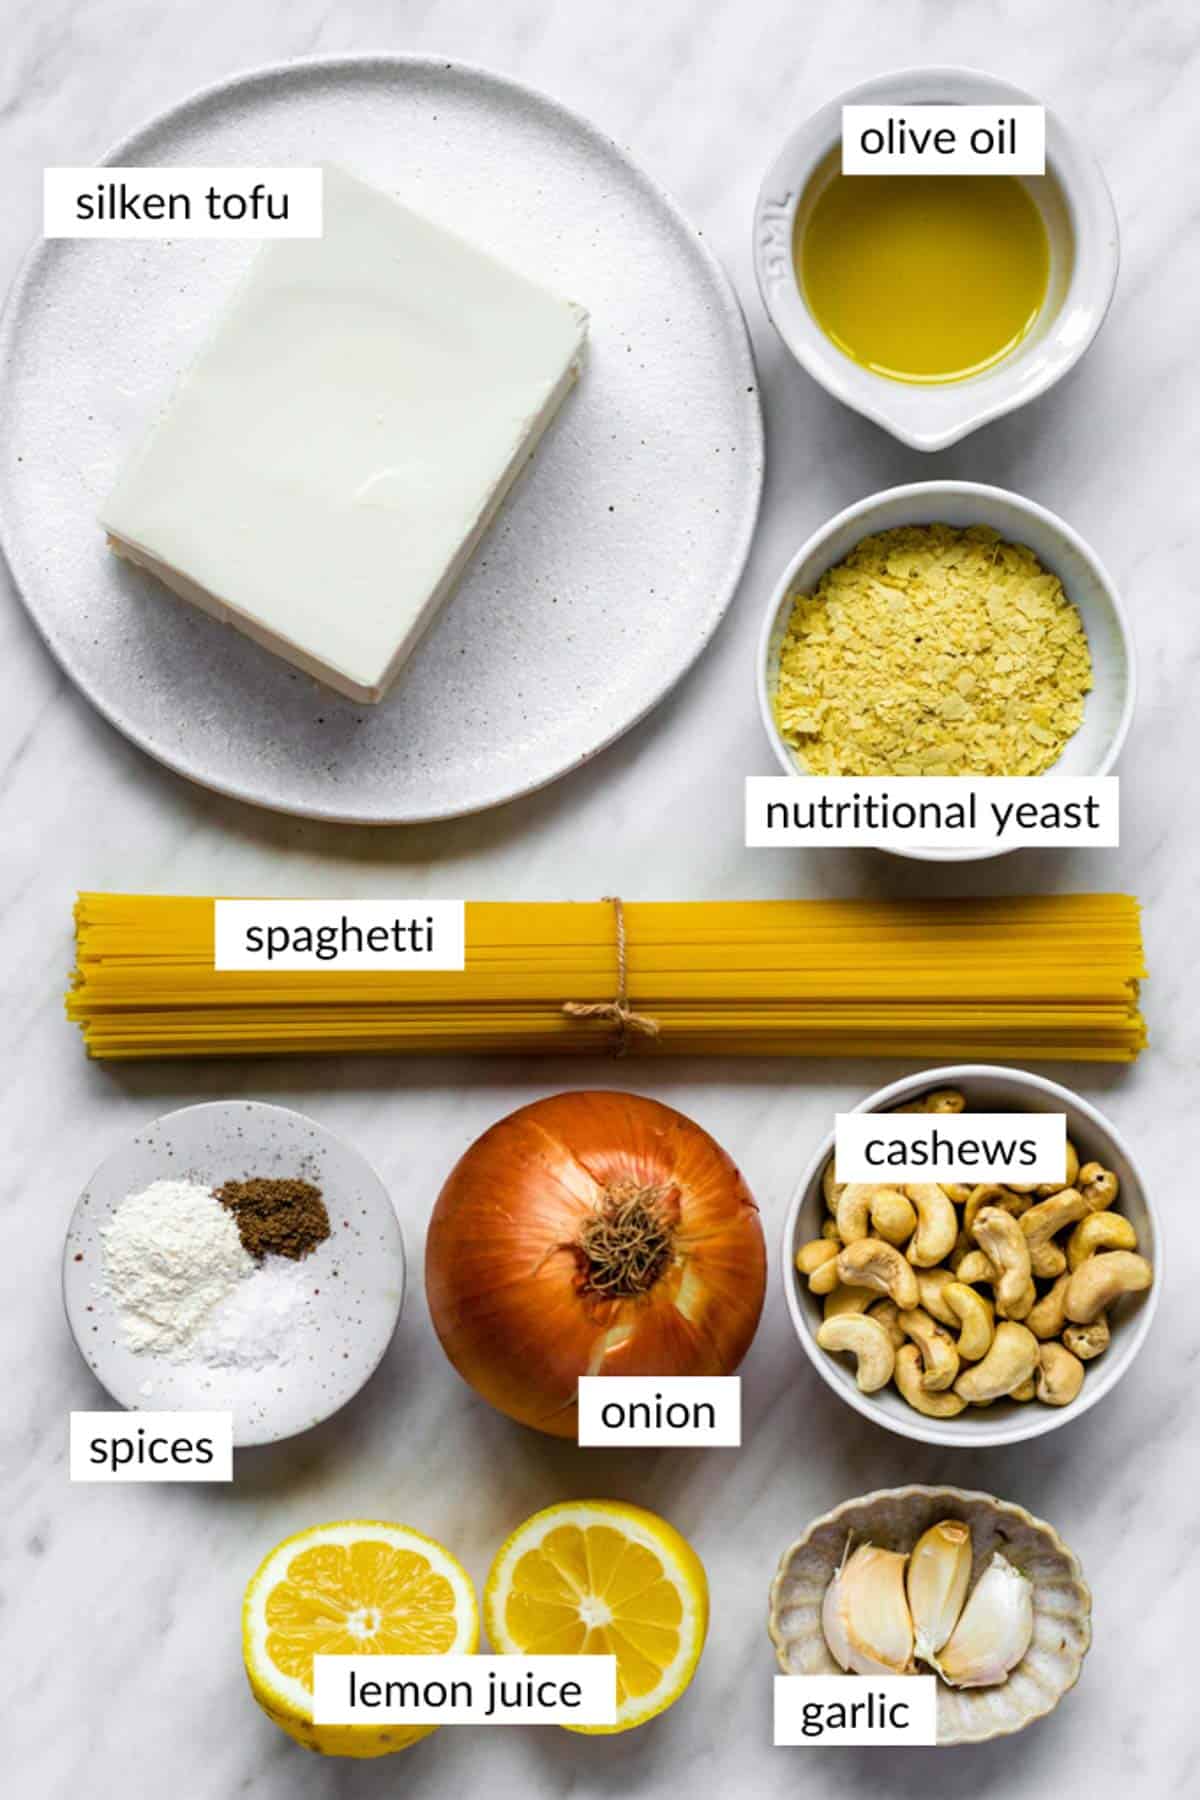 Ingredients needed for making silken tofu pasta sauce with text overlay on each ingredient.